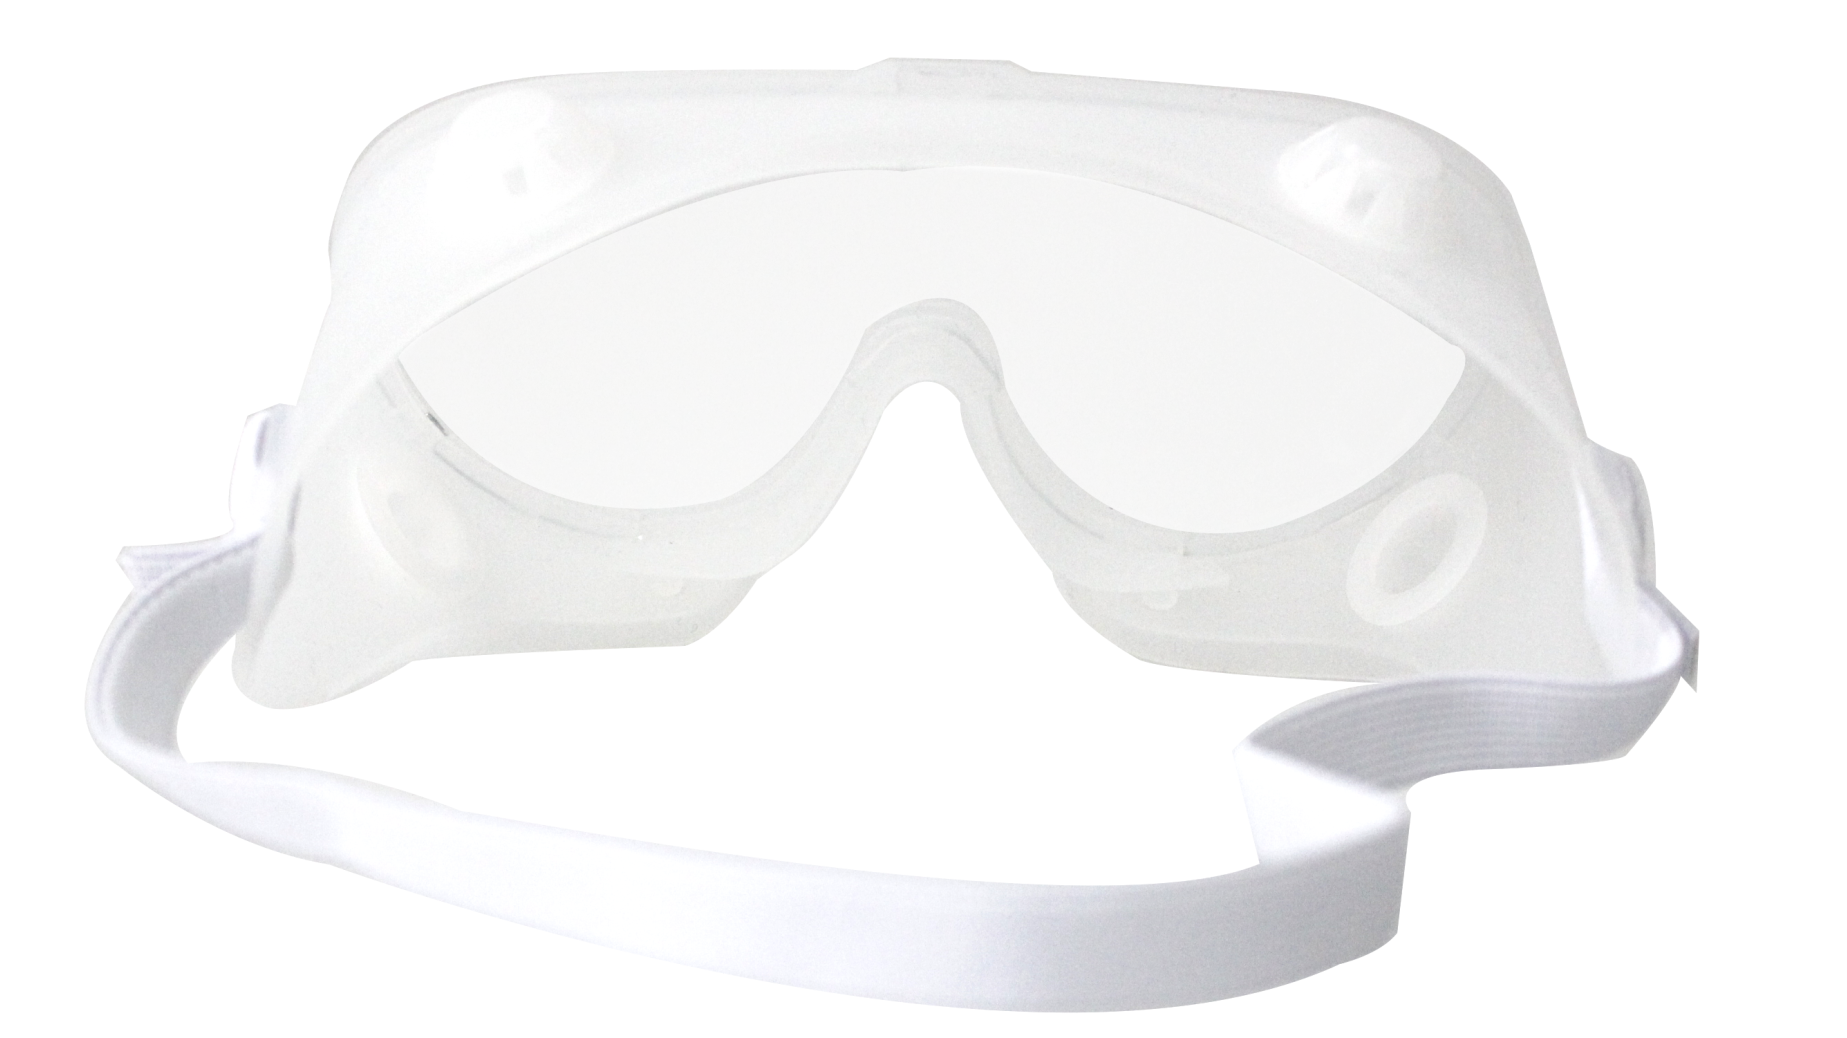 Goggles related questions and answers